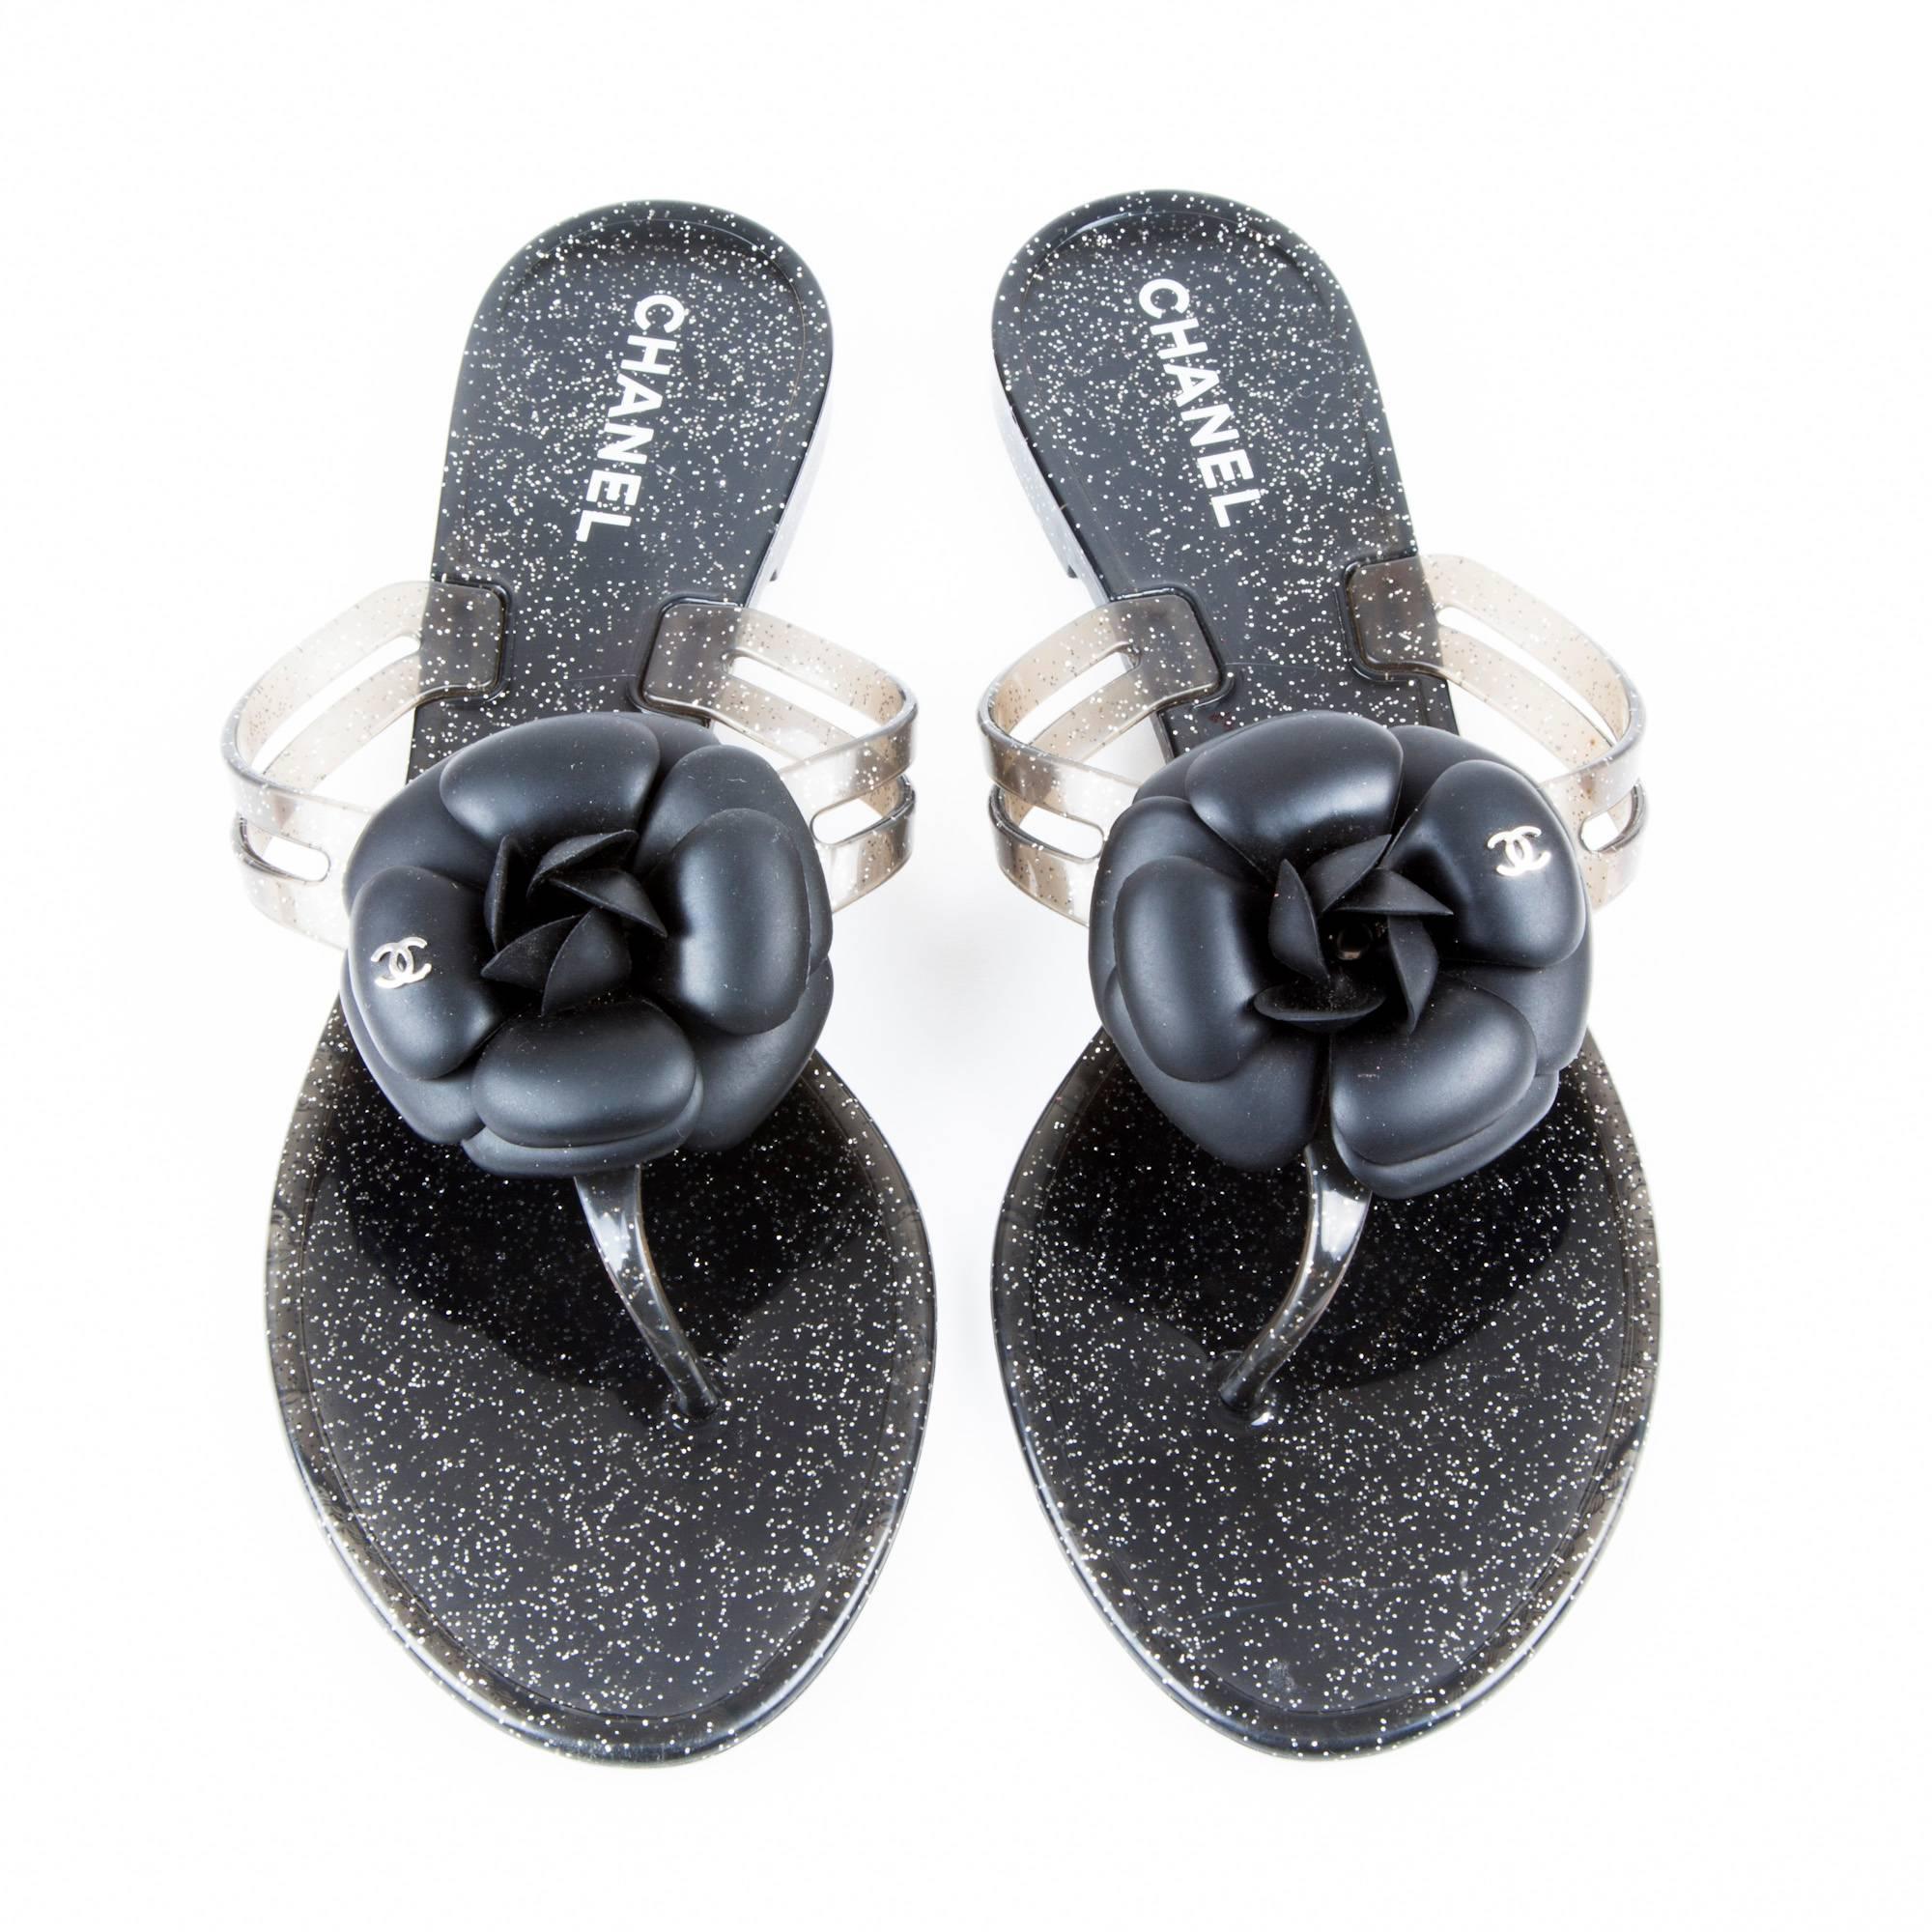 Chanel sandals in black and gray plastic with silver glitter inclusions.

Black camellia with a silver CC logo.

Length of the sole: 26 cm. In Very good condition.

Delivered in their Chanel box